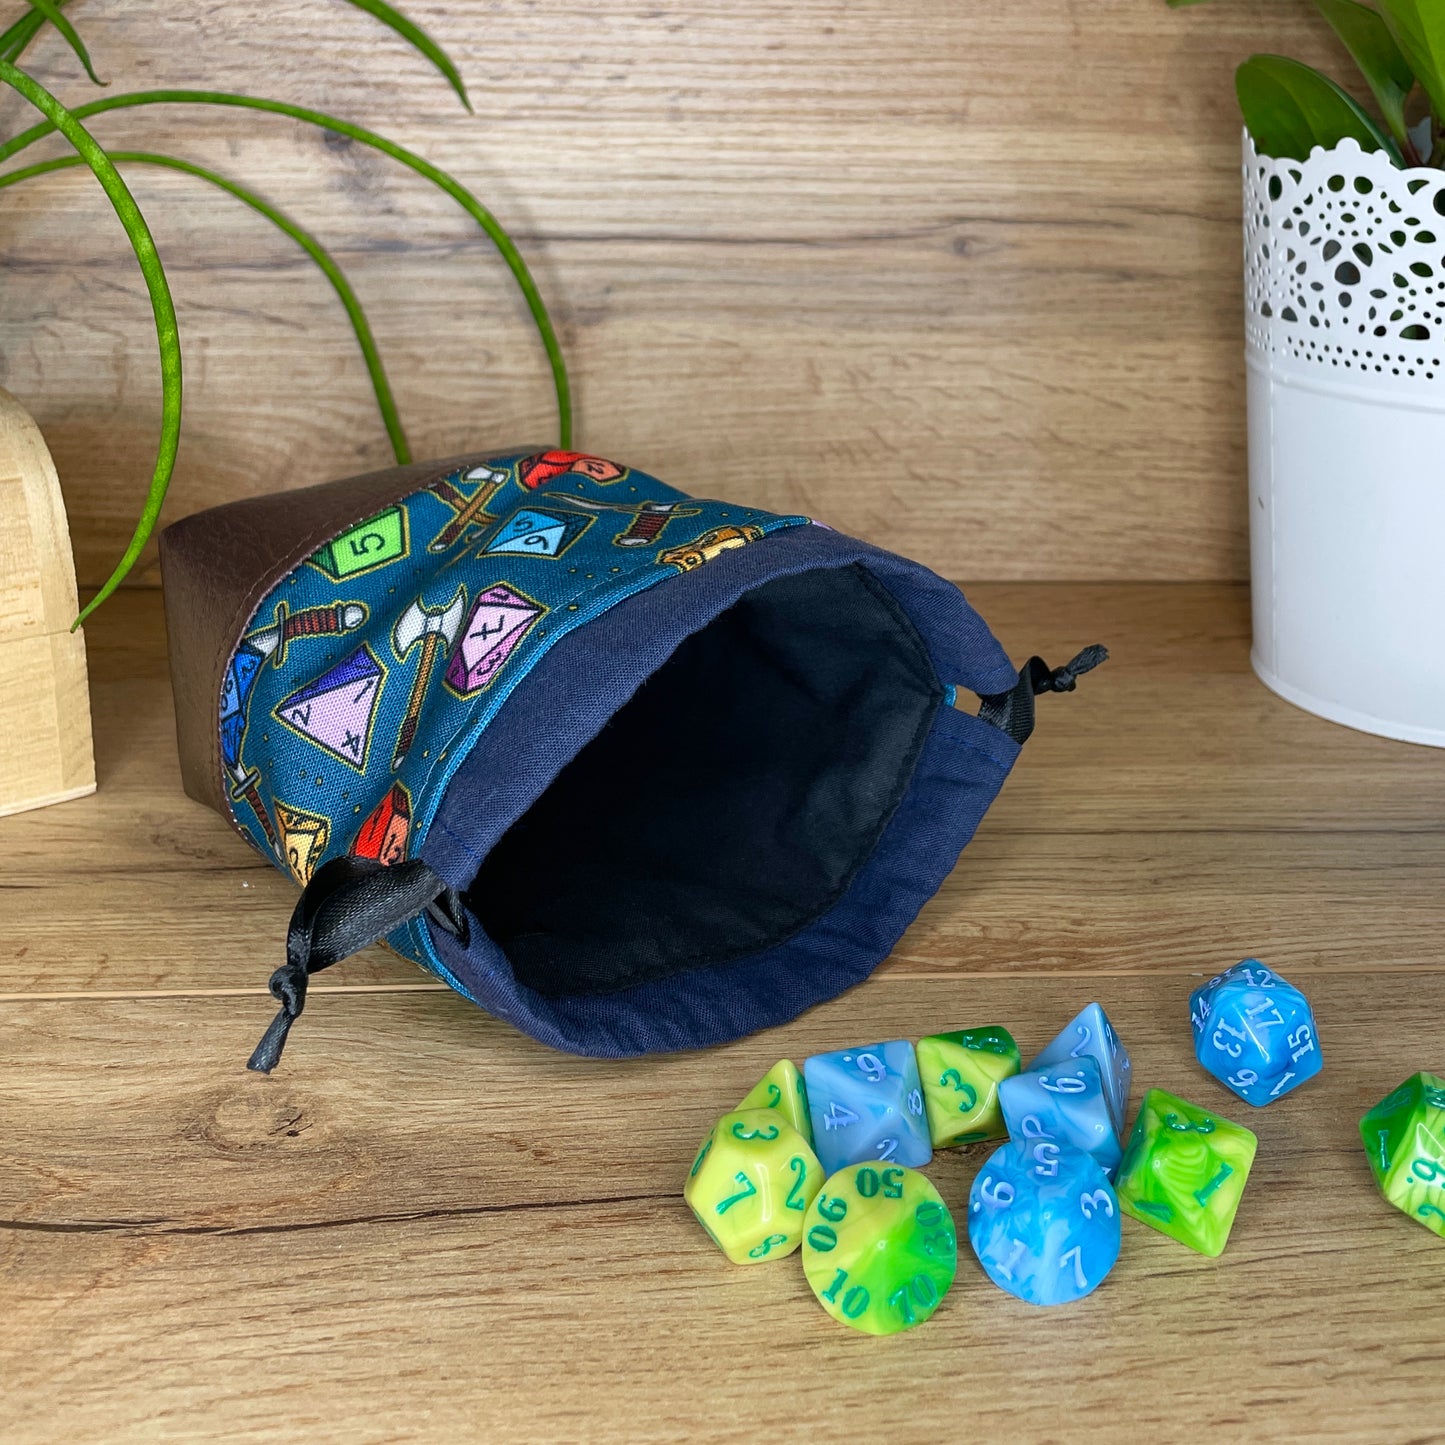 Adventurer's Life for Me Dice Bags